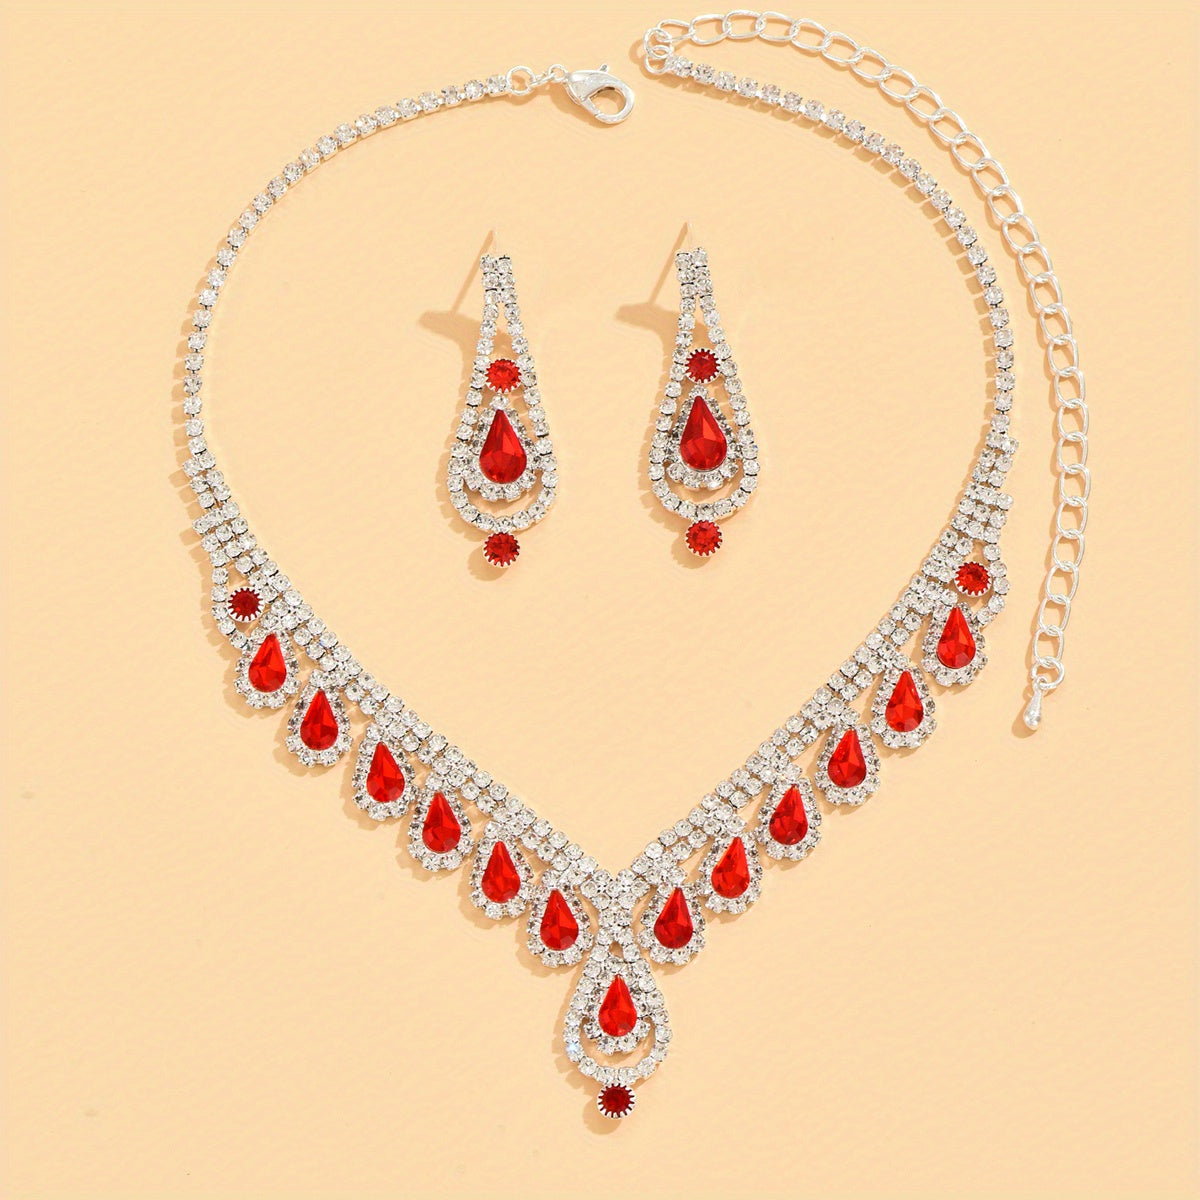 Elegant Jewelry Set with Shiny Synthetic Gems - Pendant Necklace and Drop Earrings